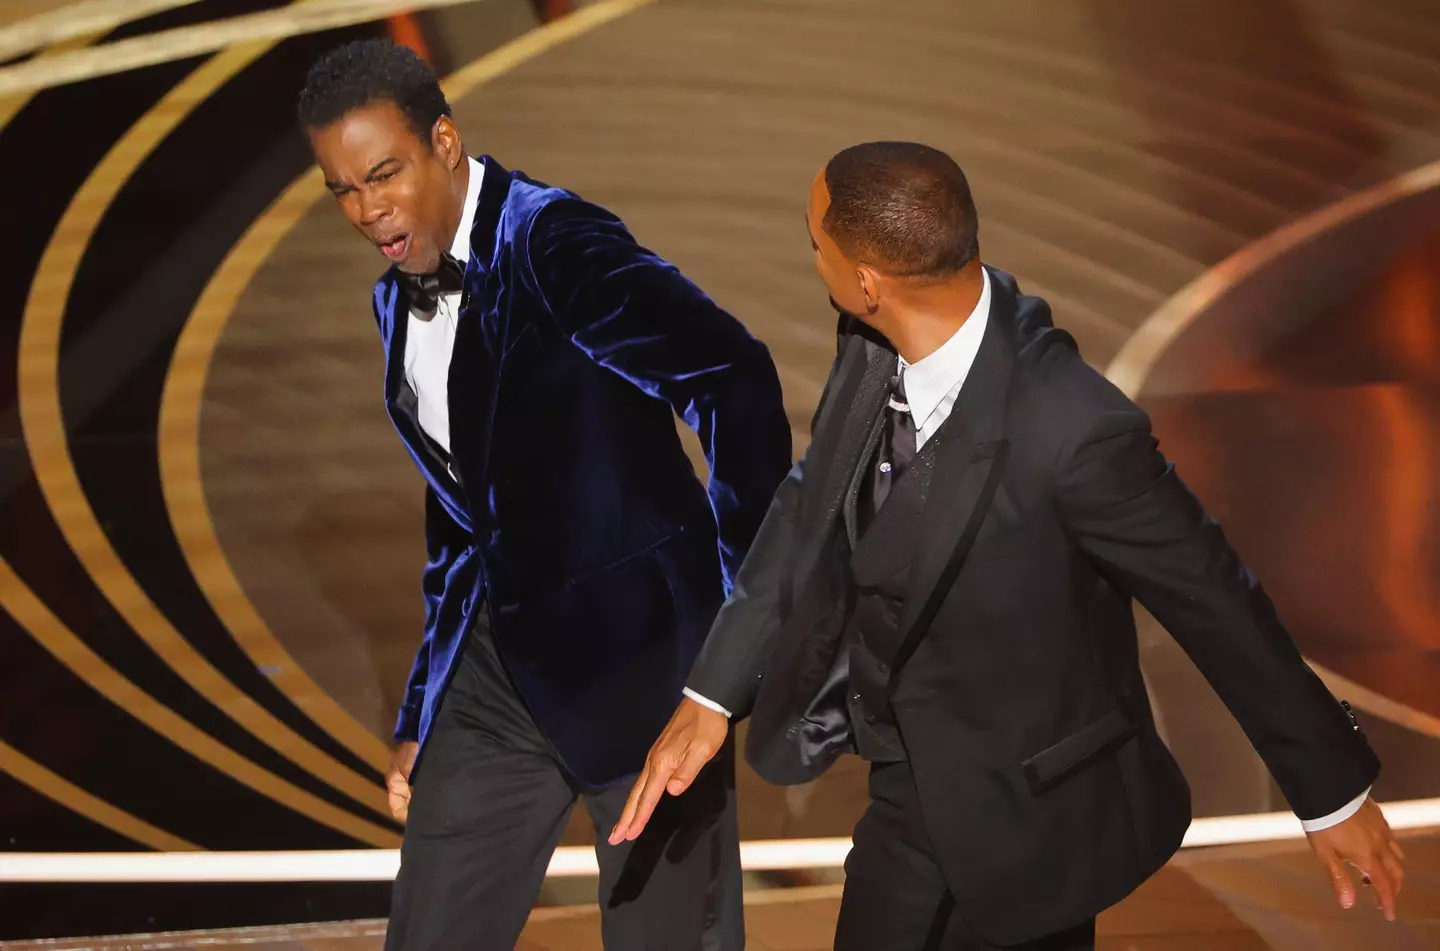 Will Smith confronted Chris Rock on stage.